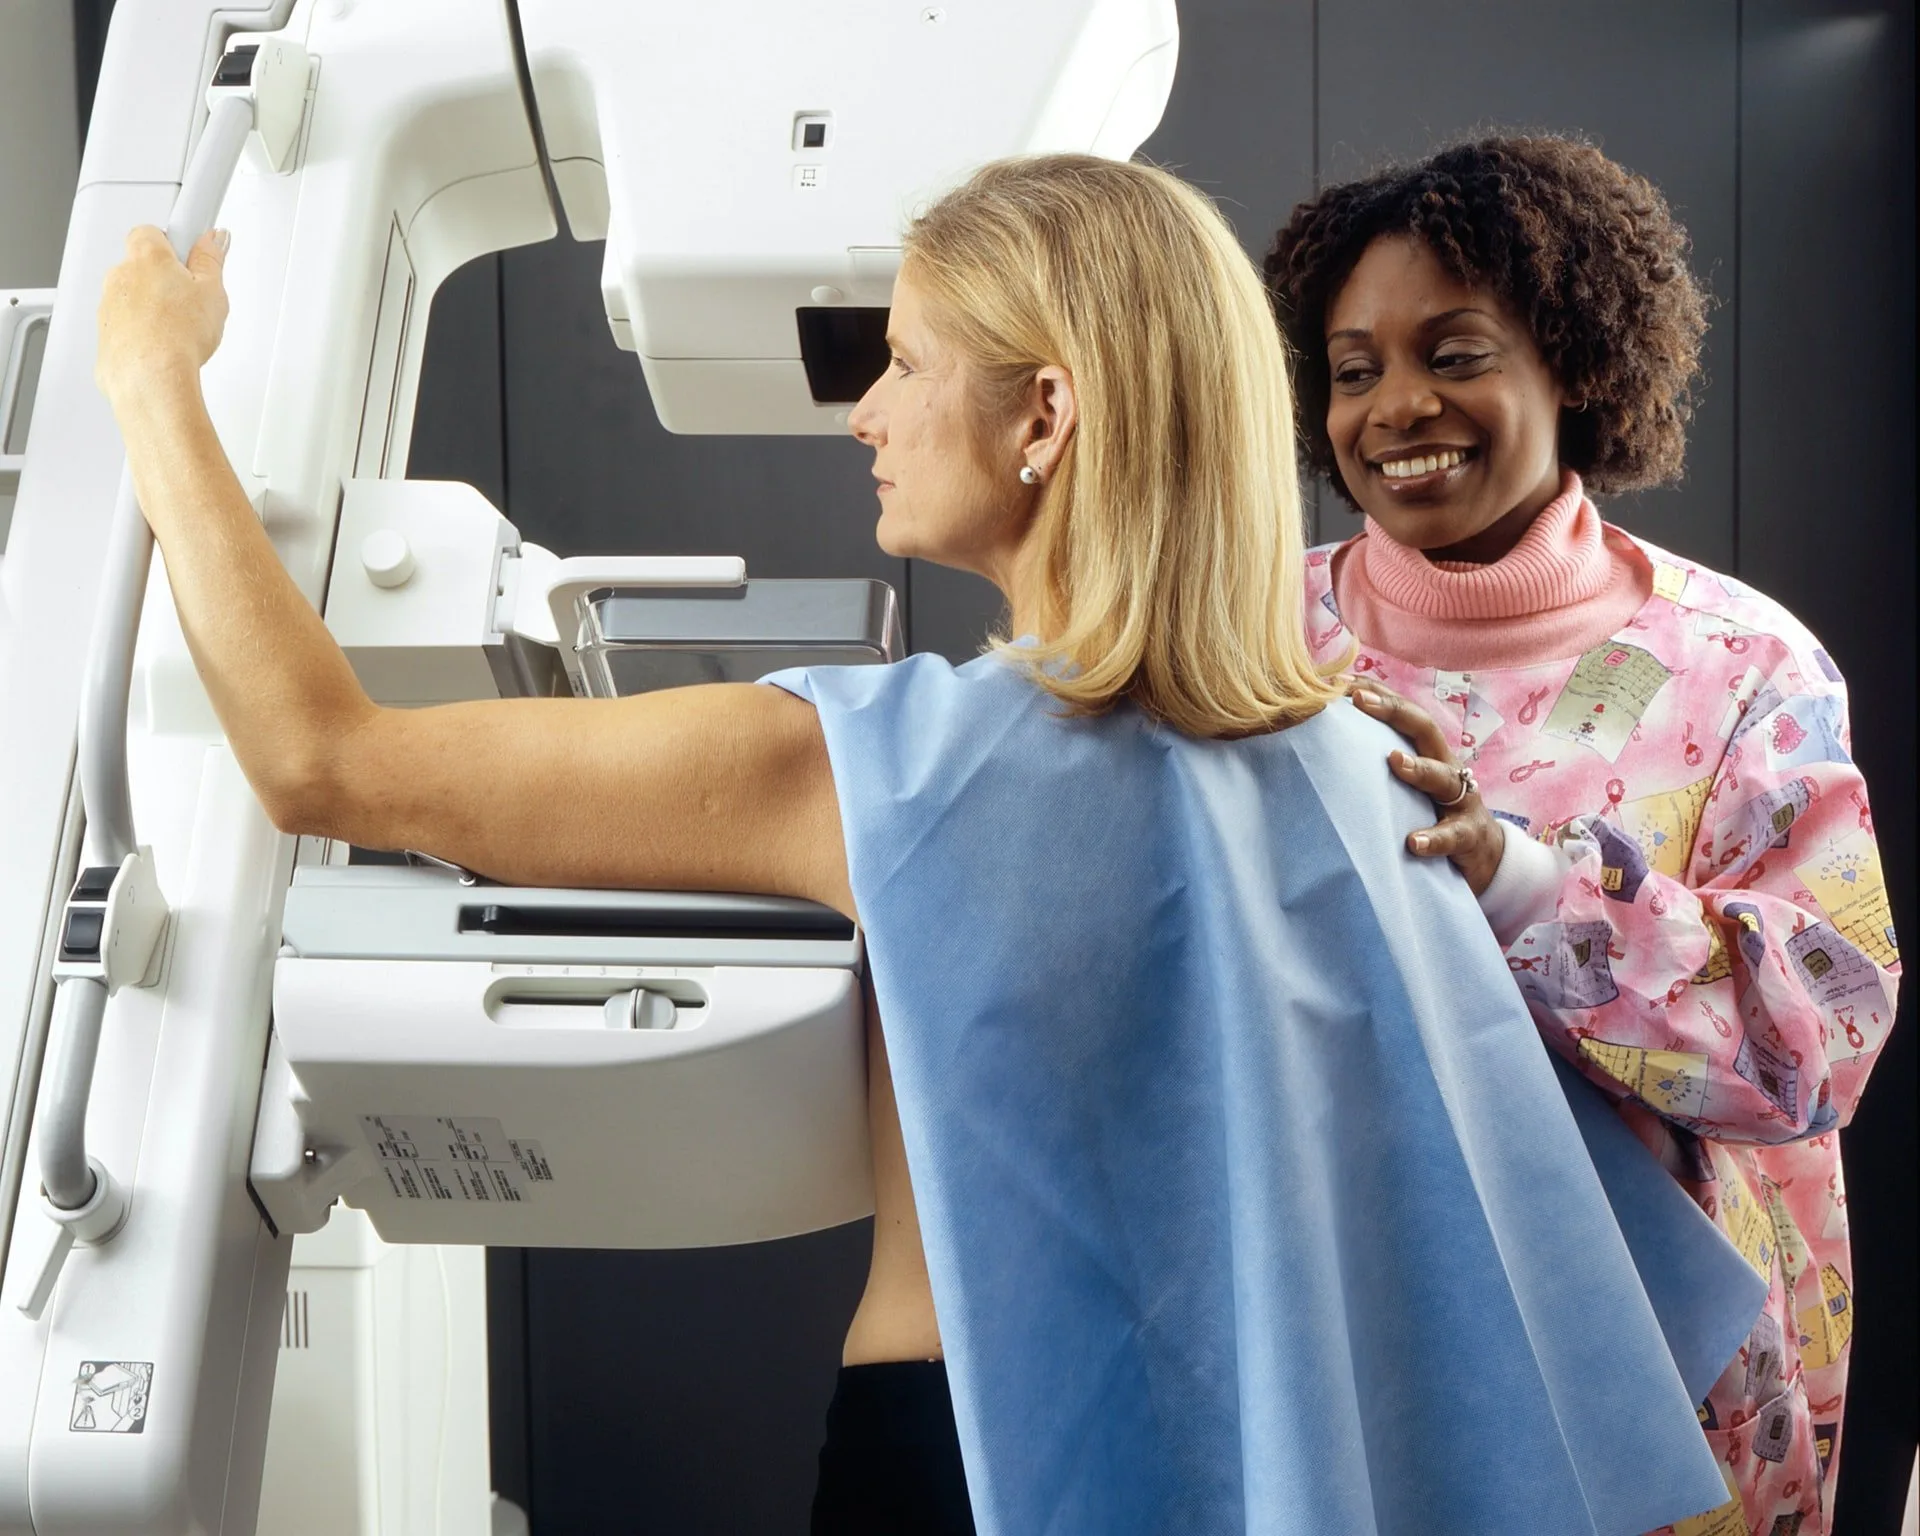 What You Need To Know About Mammograms, And Why They’re Important